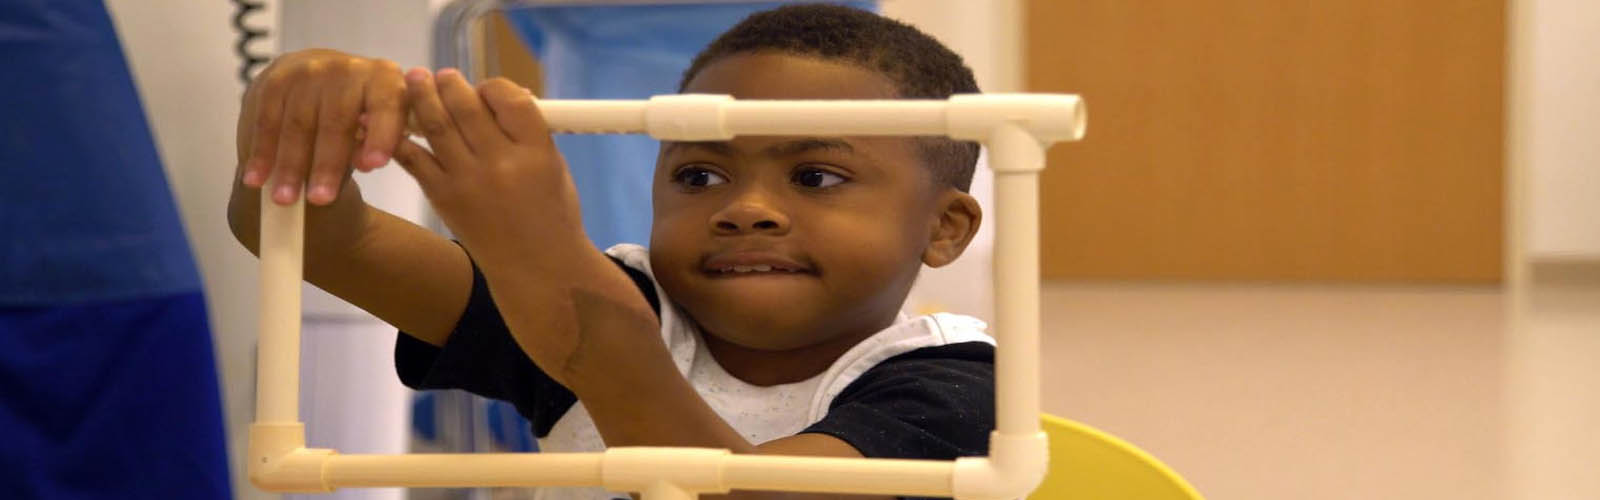 World´s first child hand transplant a ´success´